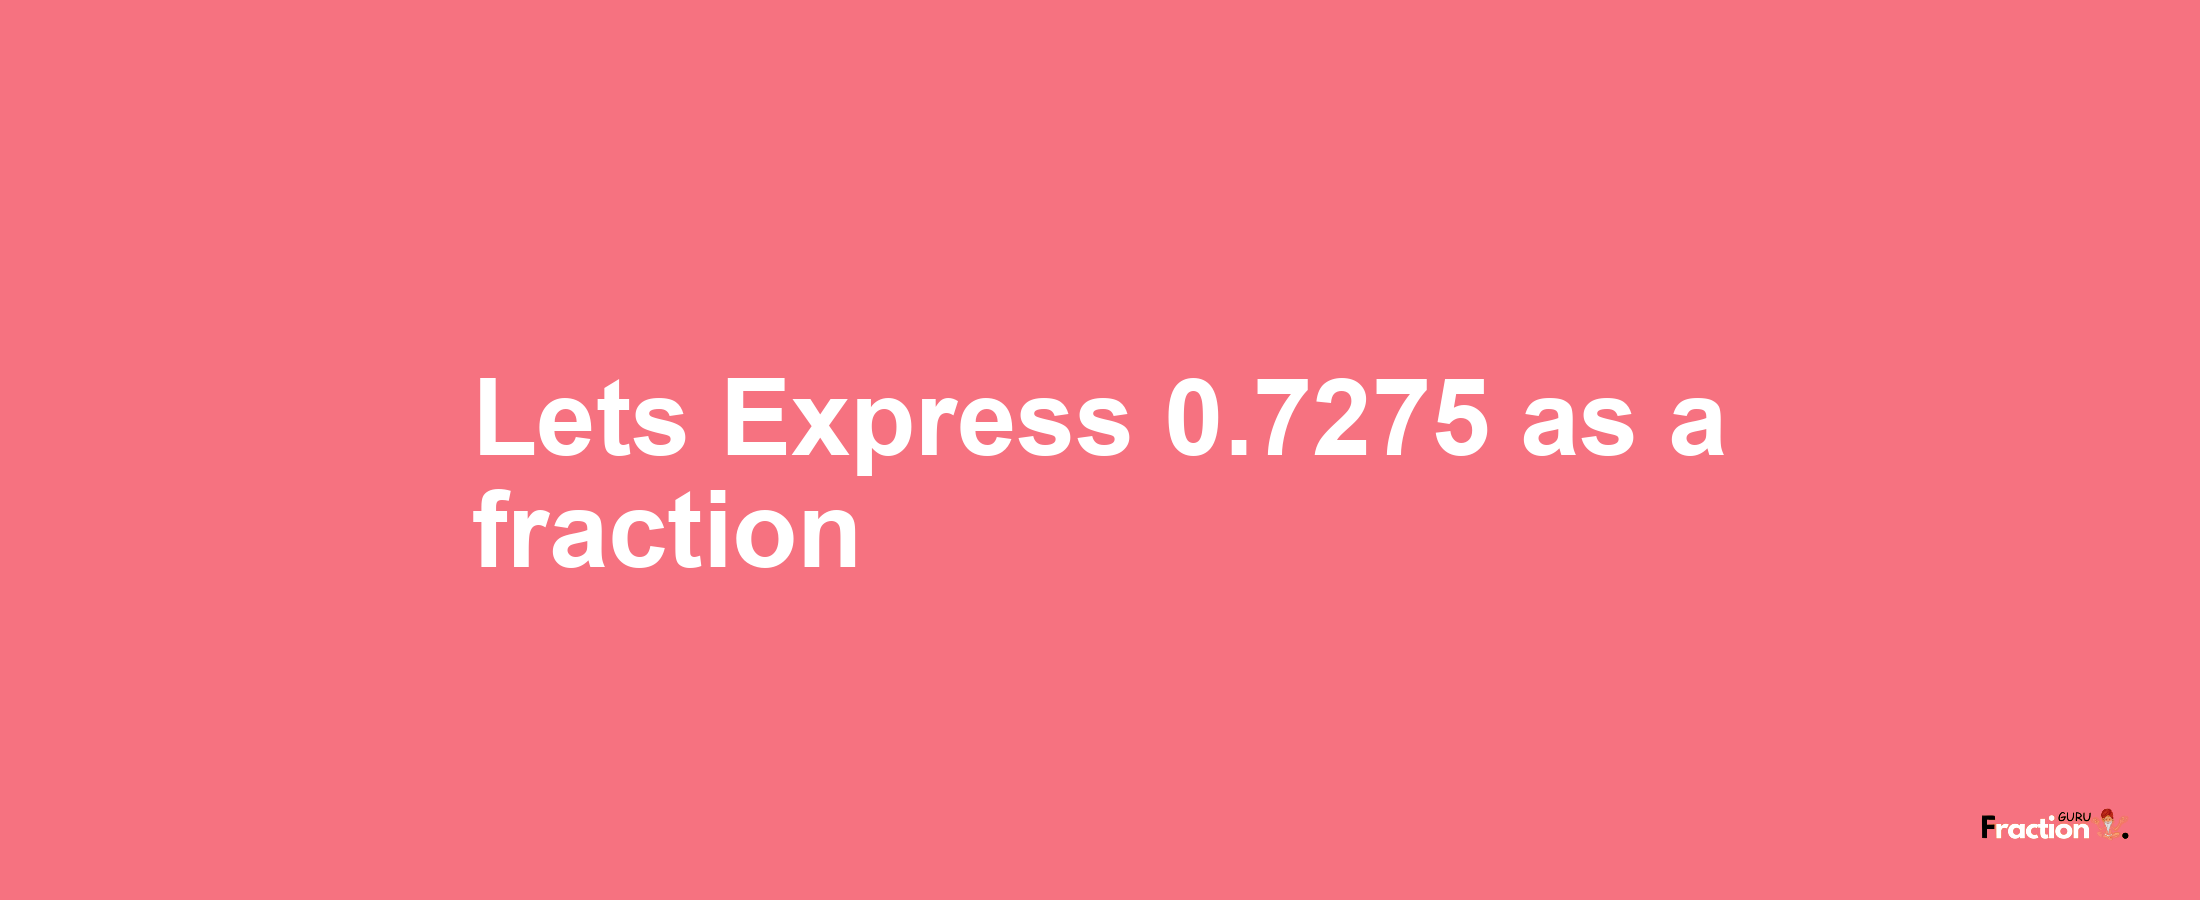 Lets Express 0.7275 as afraction